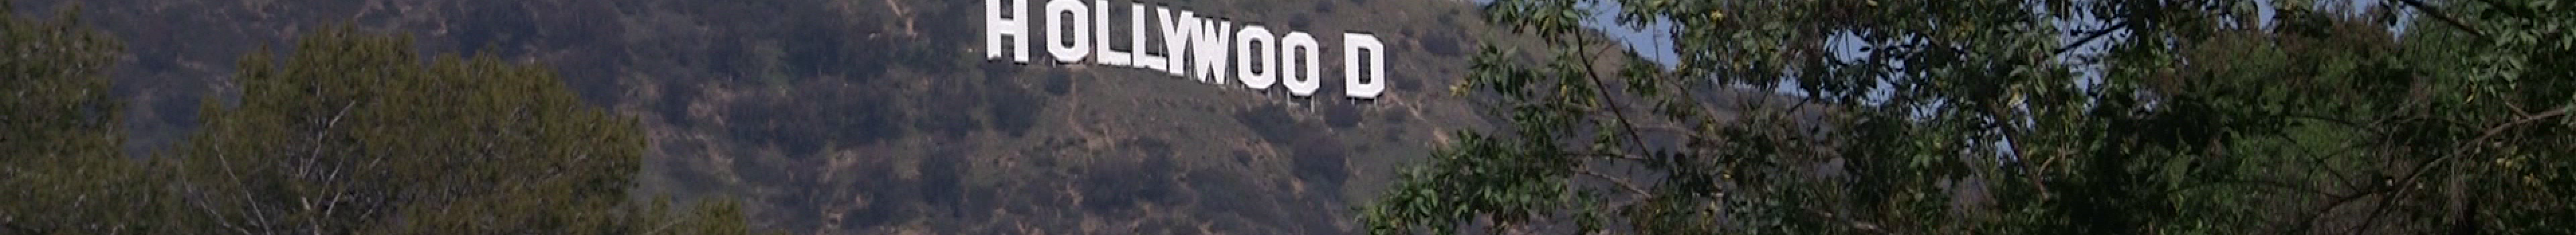 A view of the Hollywood sign in Los Angeles California